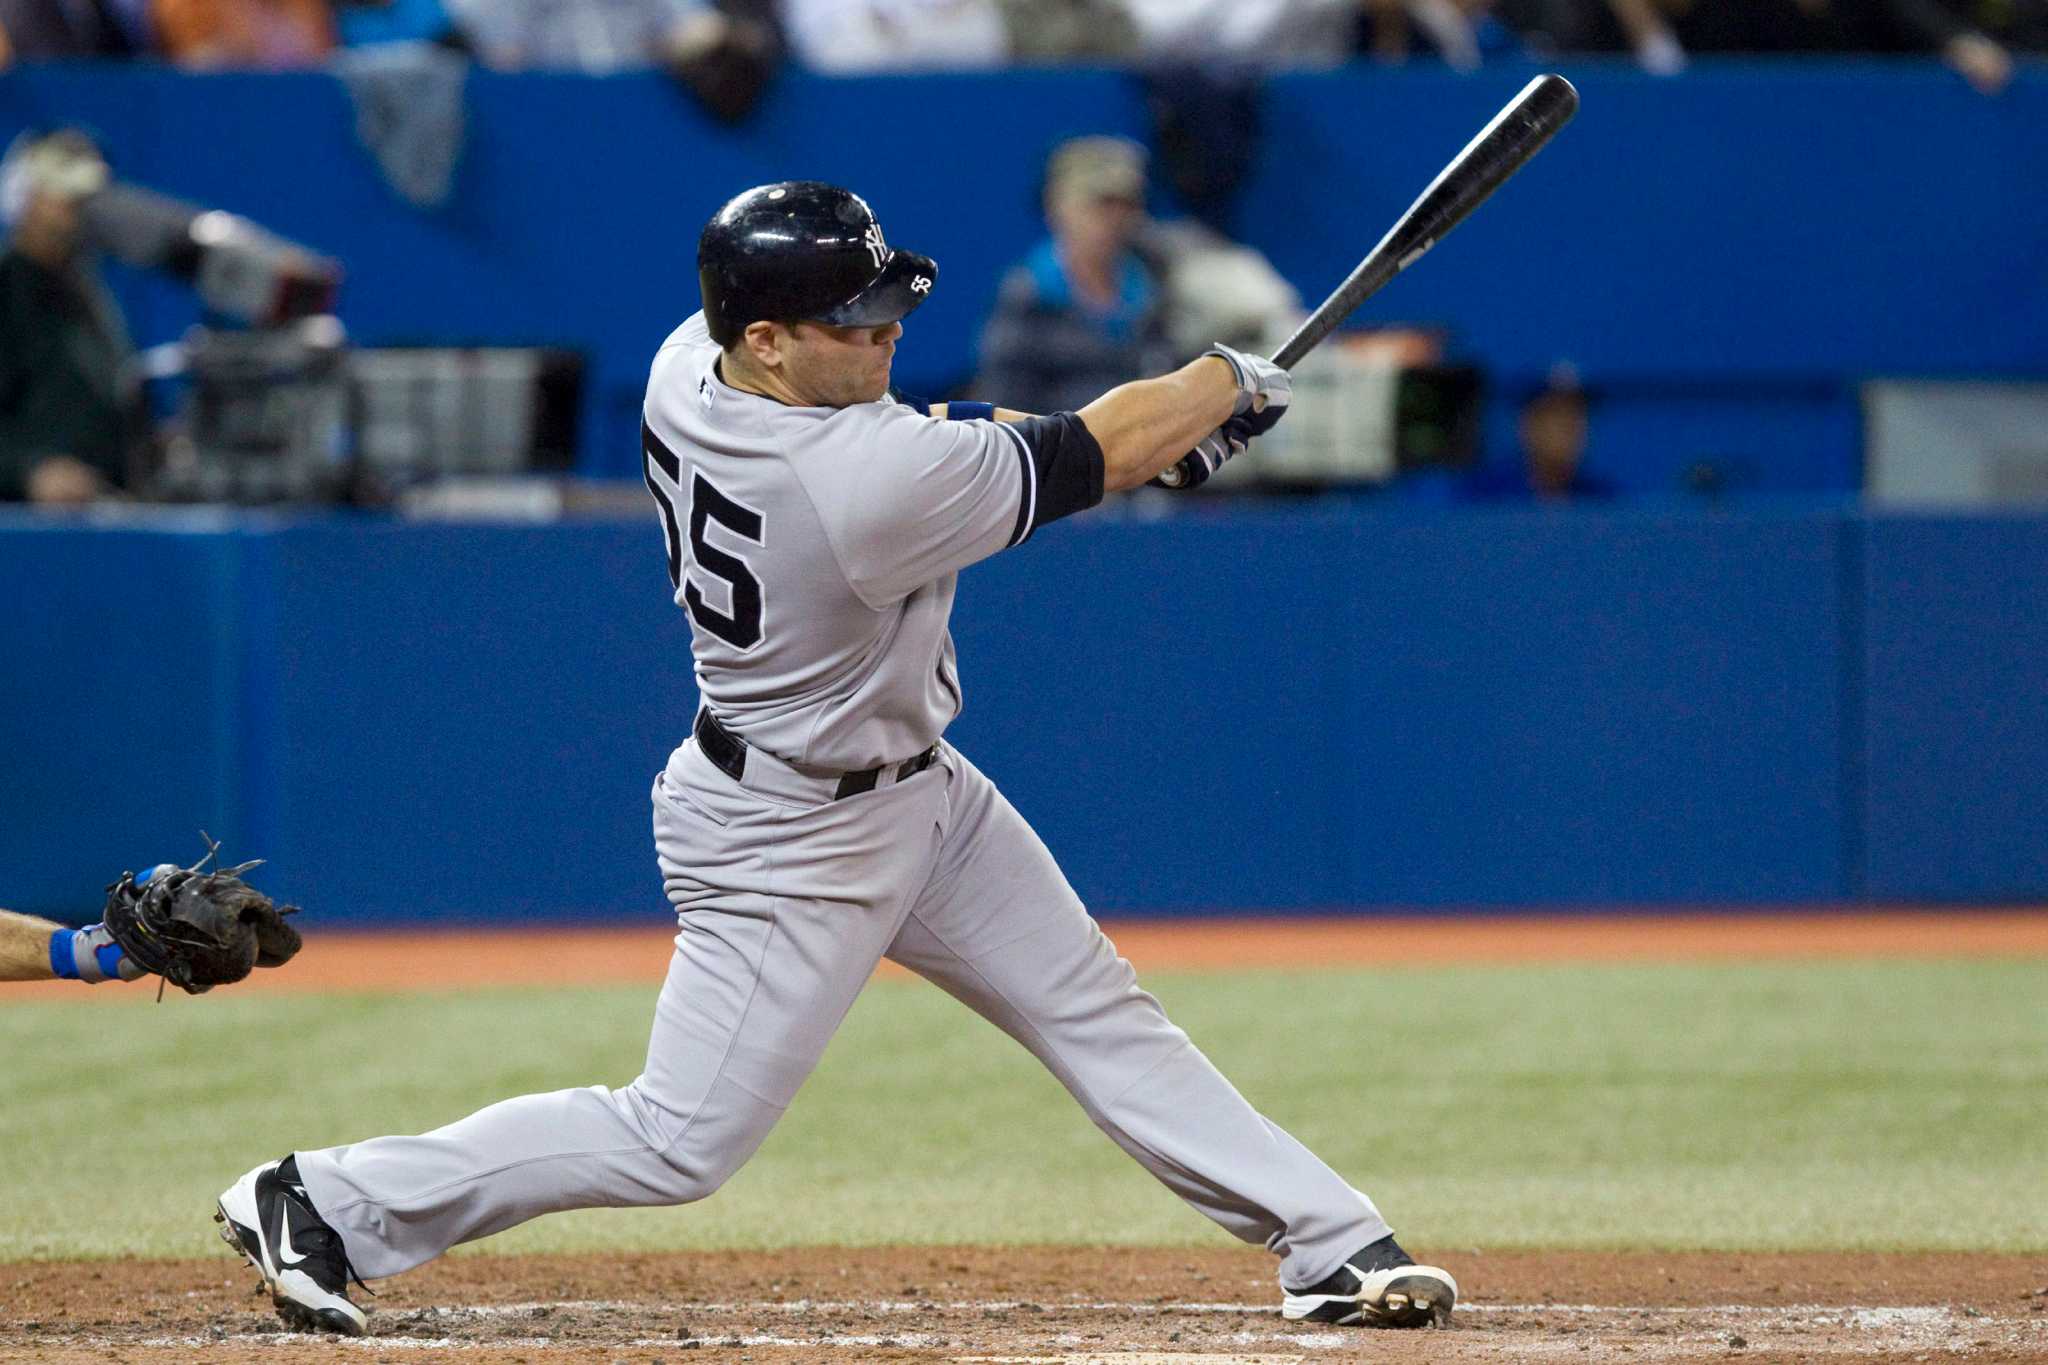 Yankees #24 Robinson Cano with a hit. Toronto Blue Jays defeated